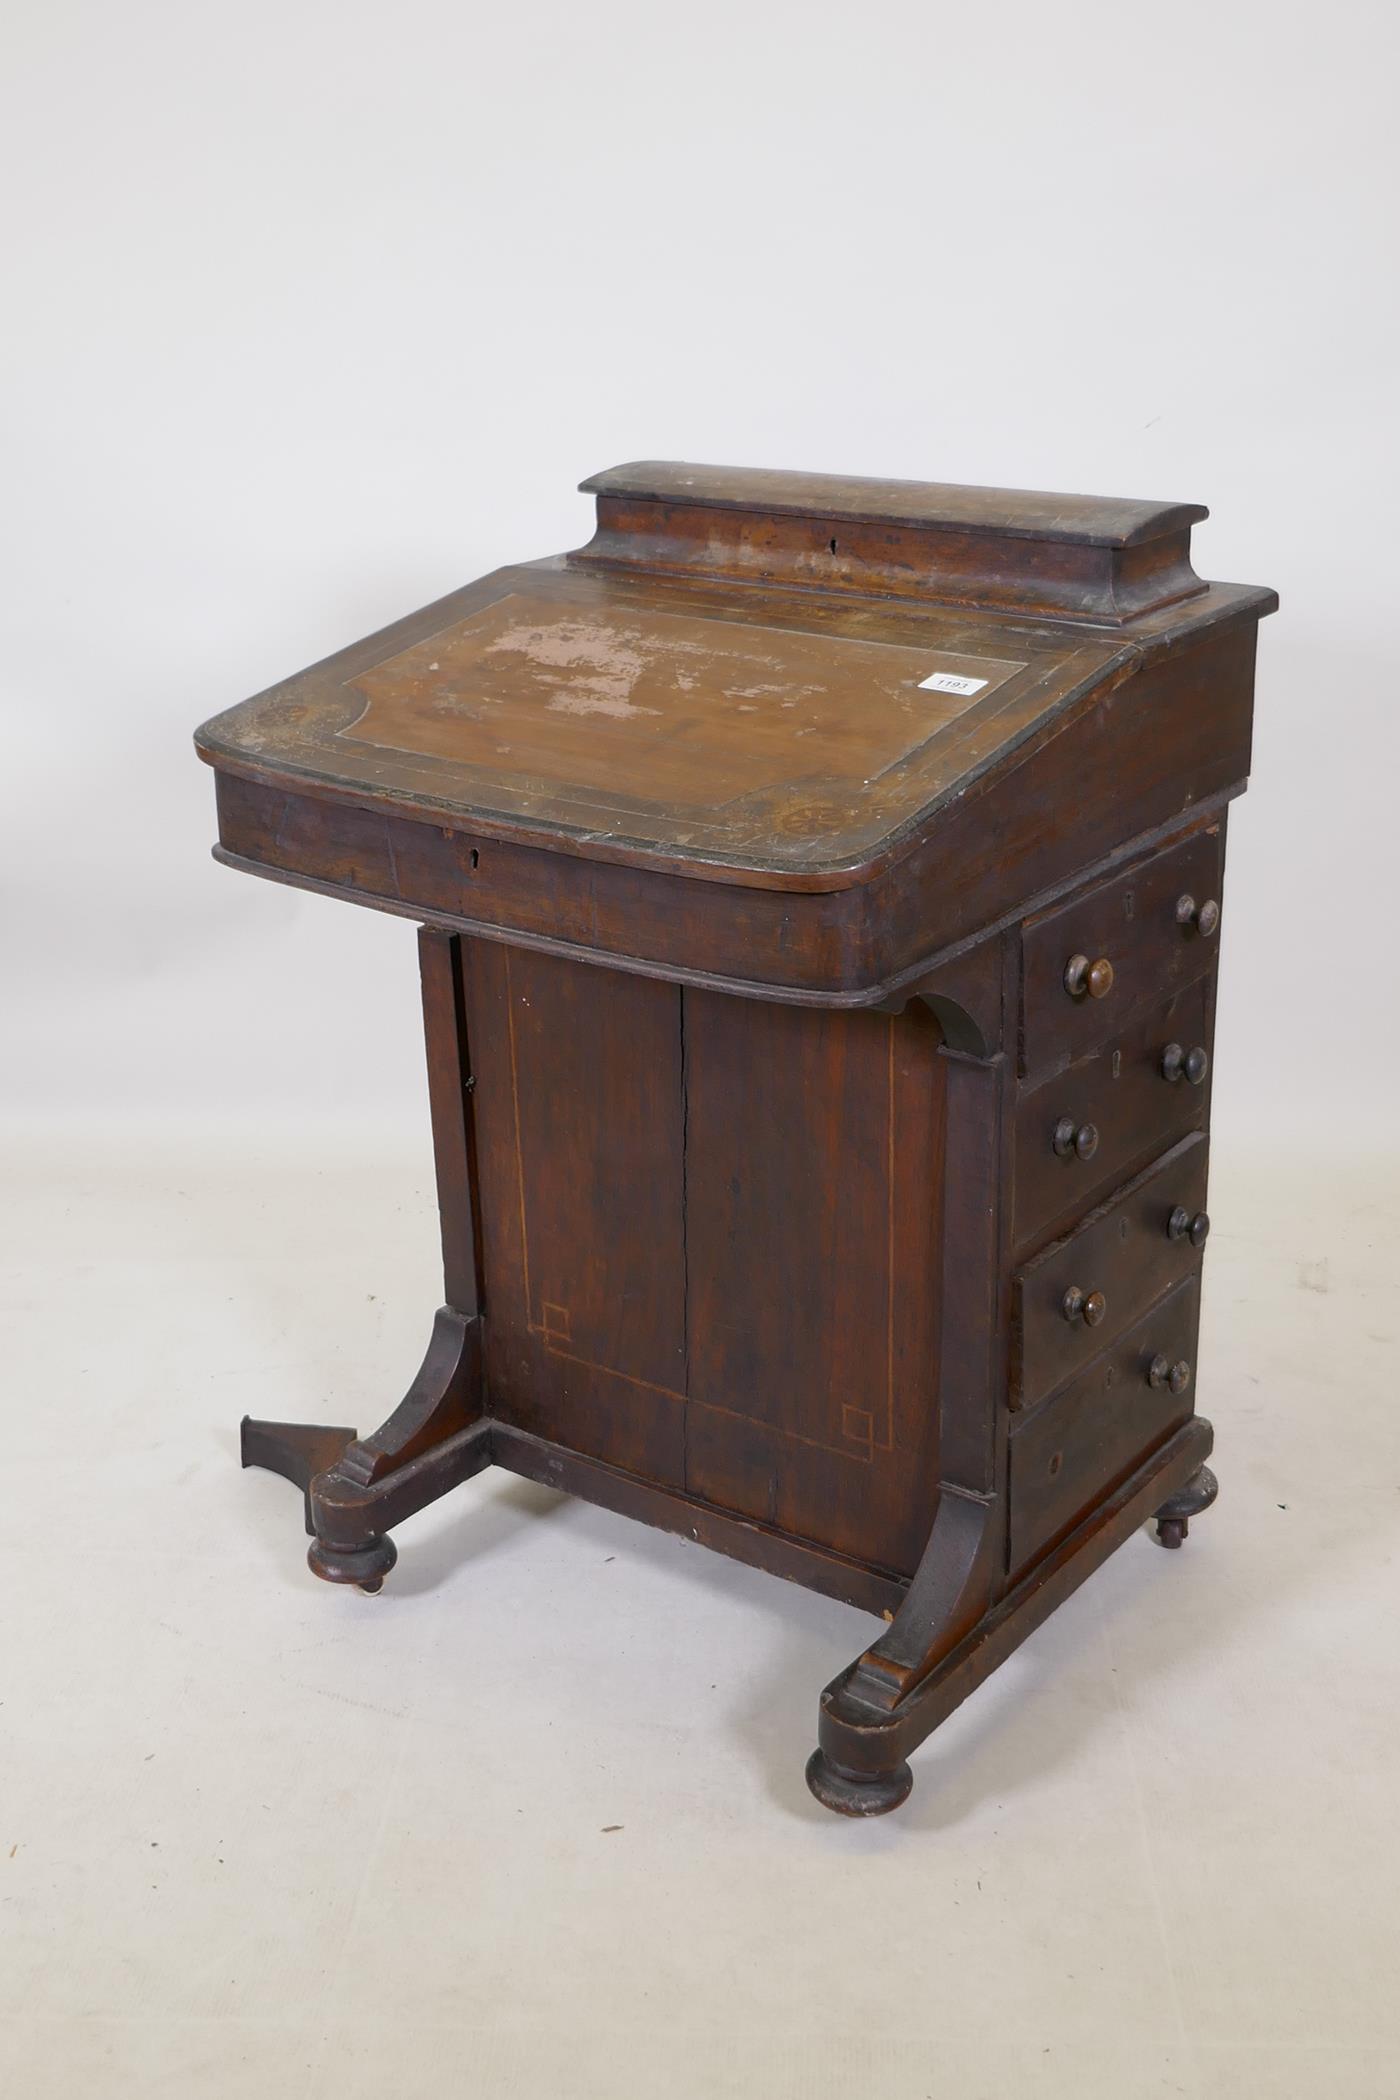 A Victorian inlaid mahogany davenport with four true and four false drawers and lift up top with